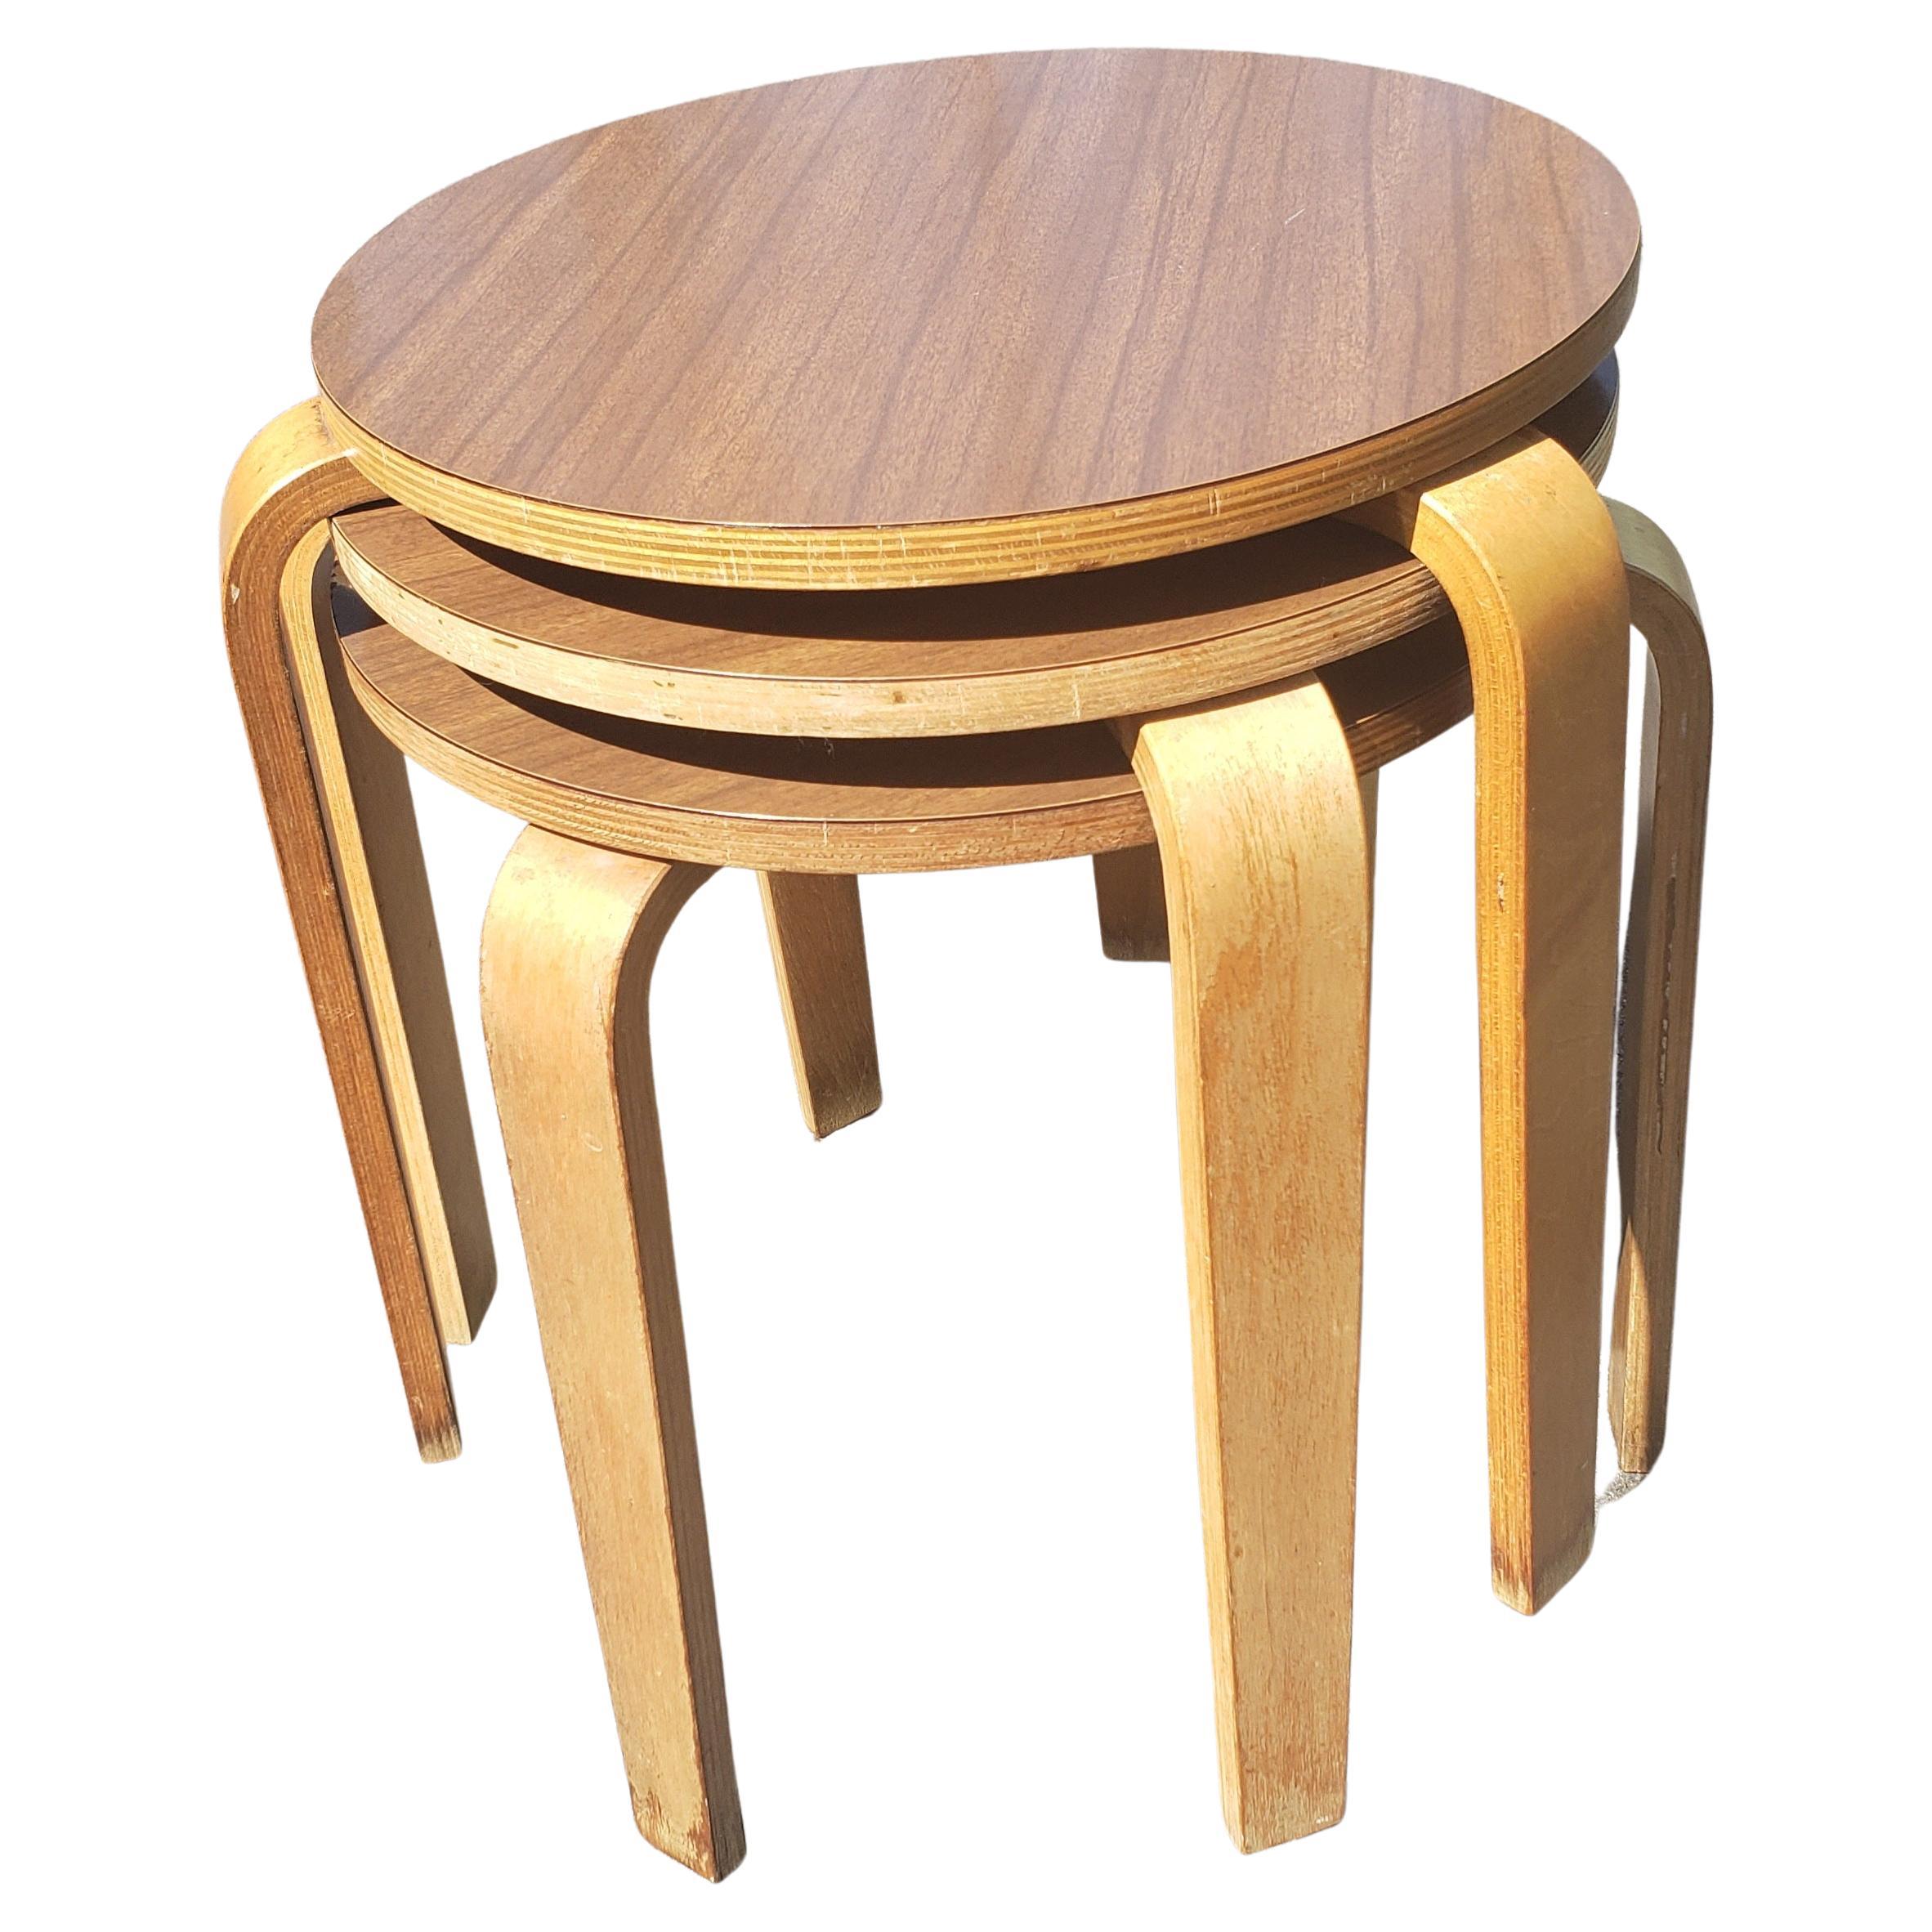 Beautiful mid century Alvar Aalto tables / stools manufactured by Artek, Model 60, Circa 1940s,
Stacking tables. Bentwood and formica top. Very good vintage condition. Wear appropriate with age and use. Minor finish losses on legs ends.

Measures